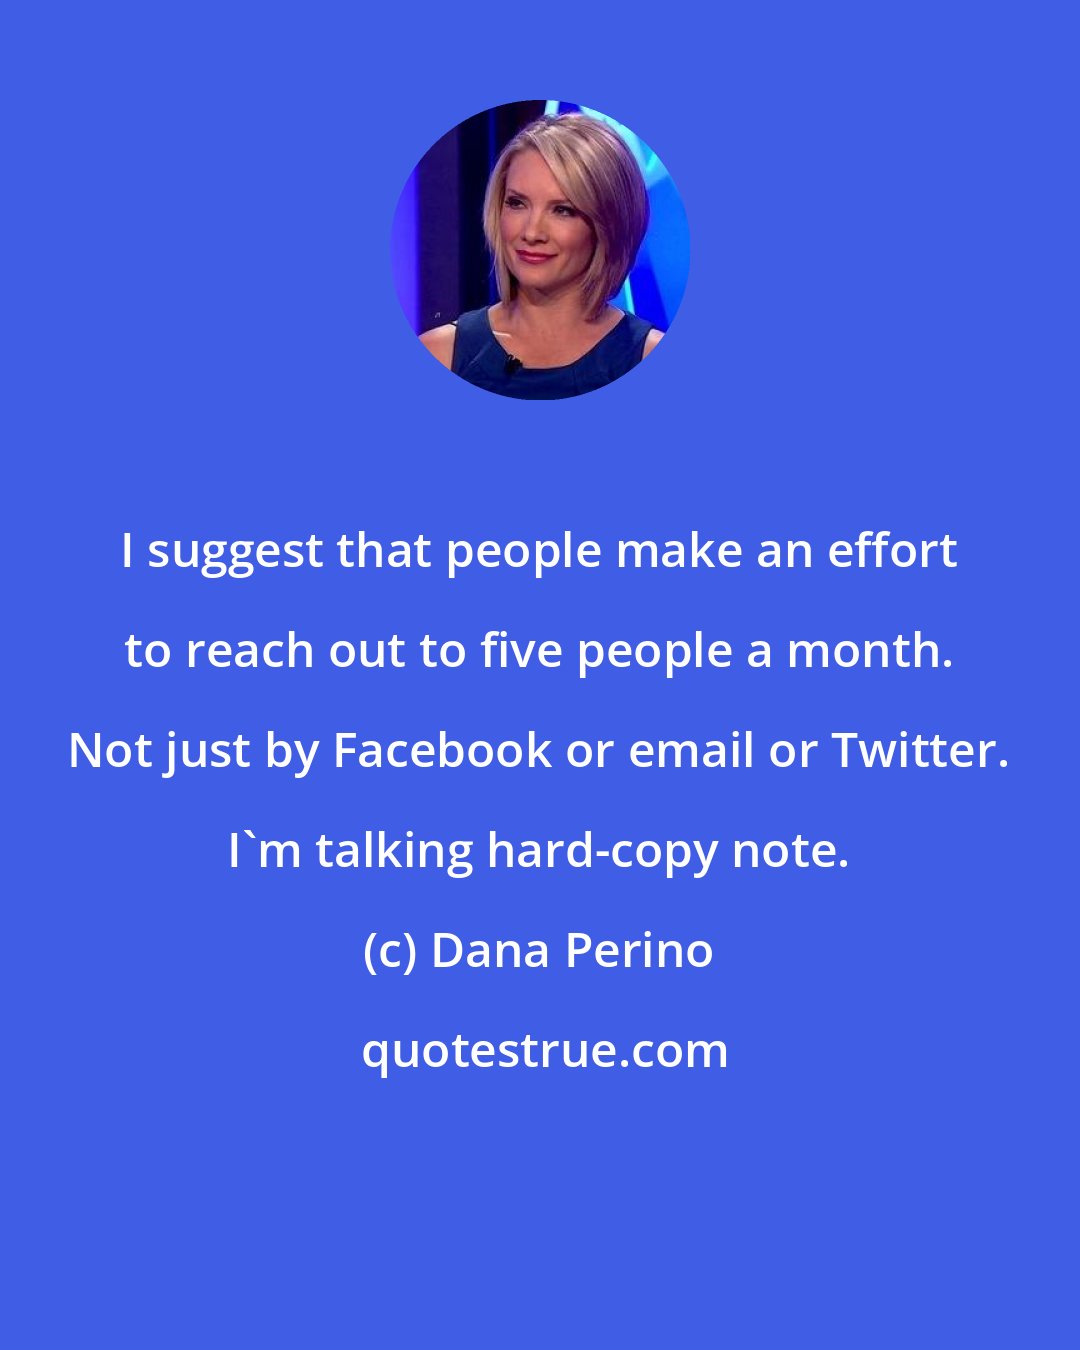 Dana Perino: I suggest that people make an effort to reach out to five people a month. Not just by Facebook or email or Twitter. I'm talking hard-copy note.